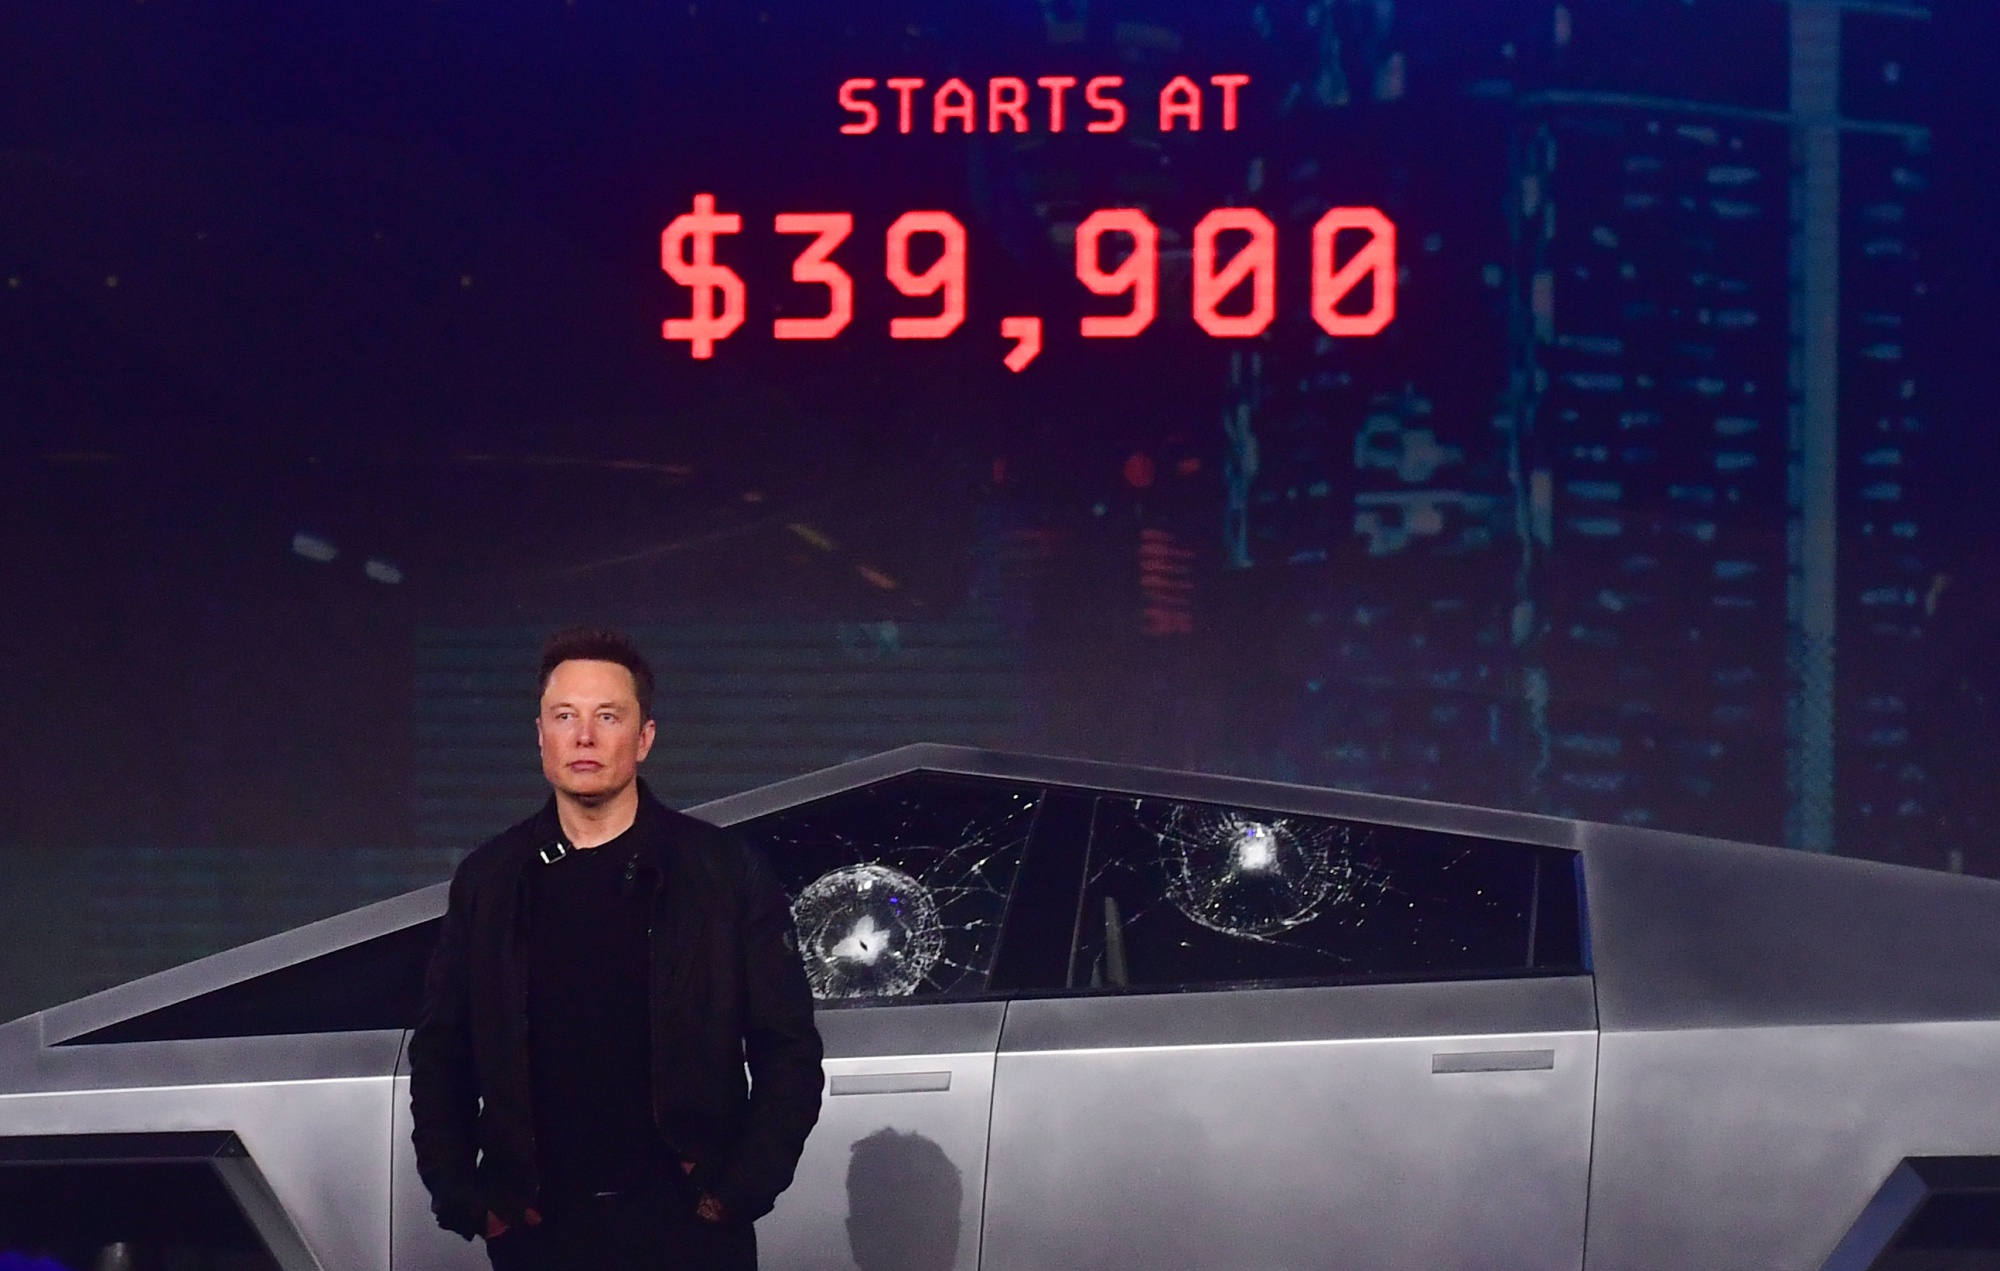 Musk Accepts Ford Challenge To Apples To Apples Truck Tug Of